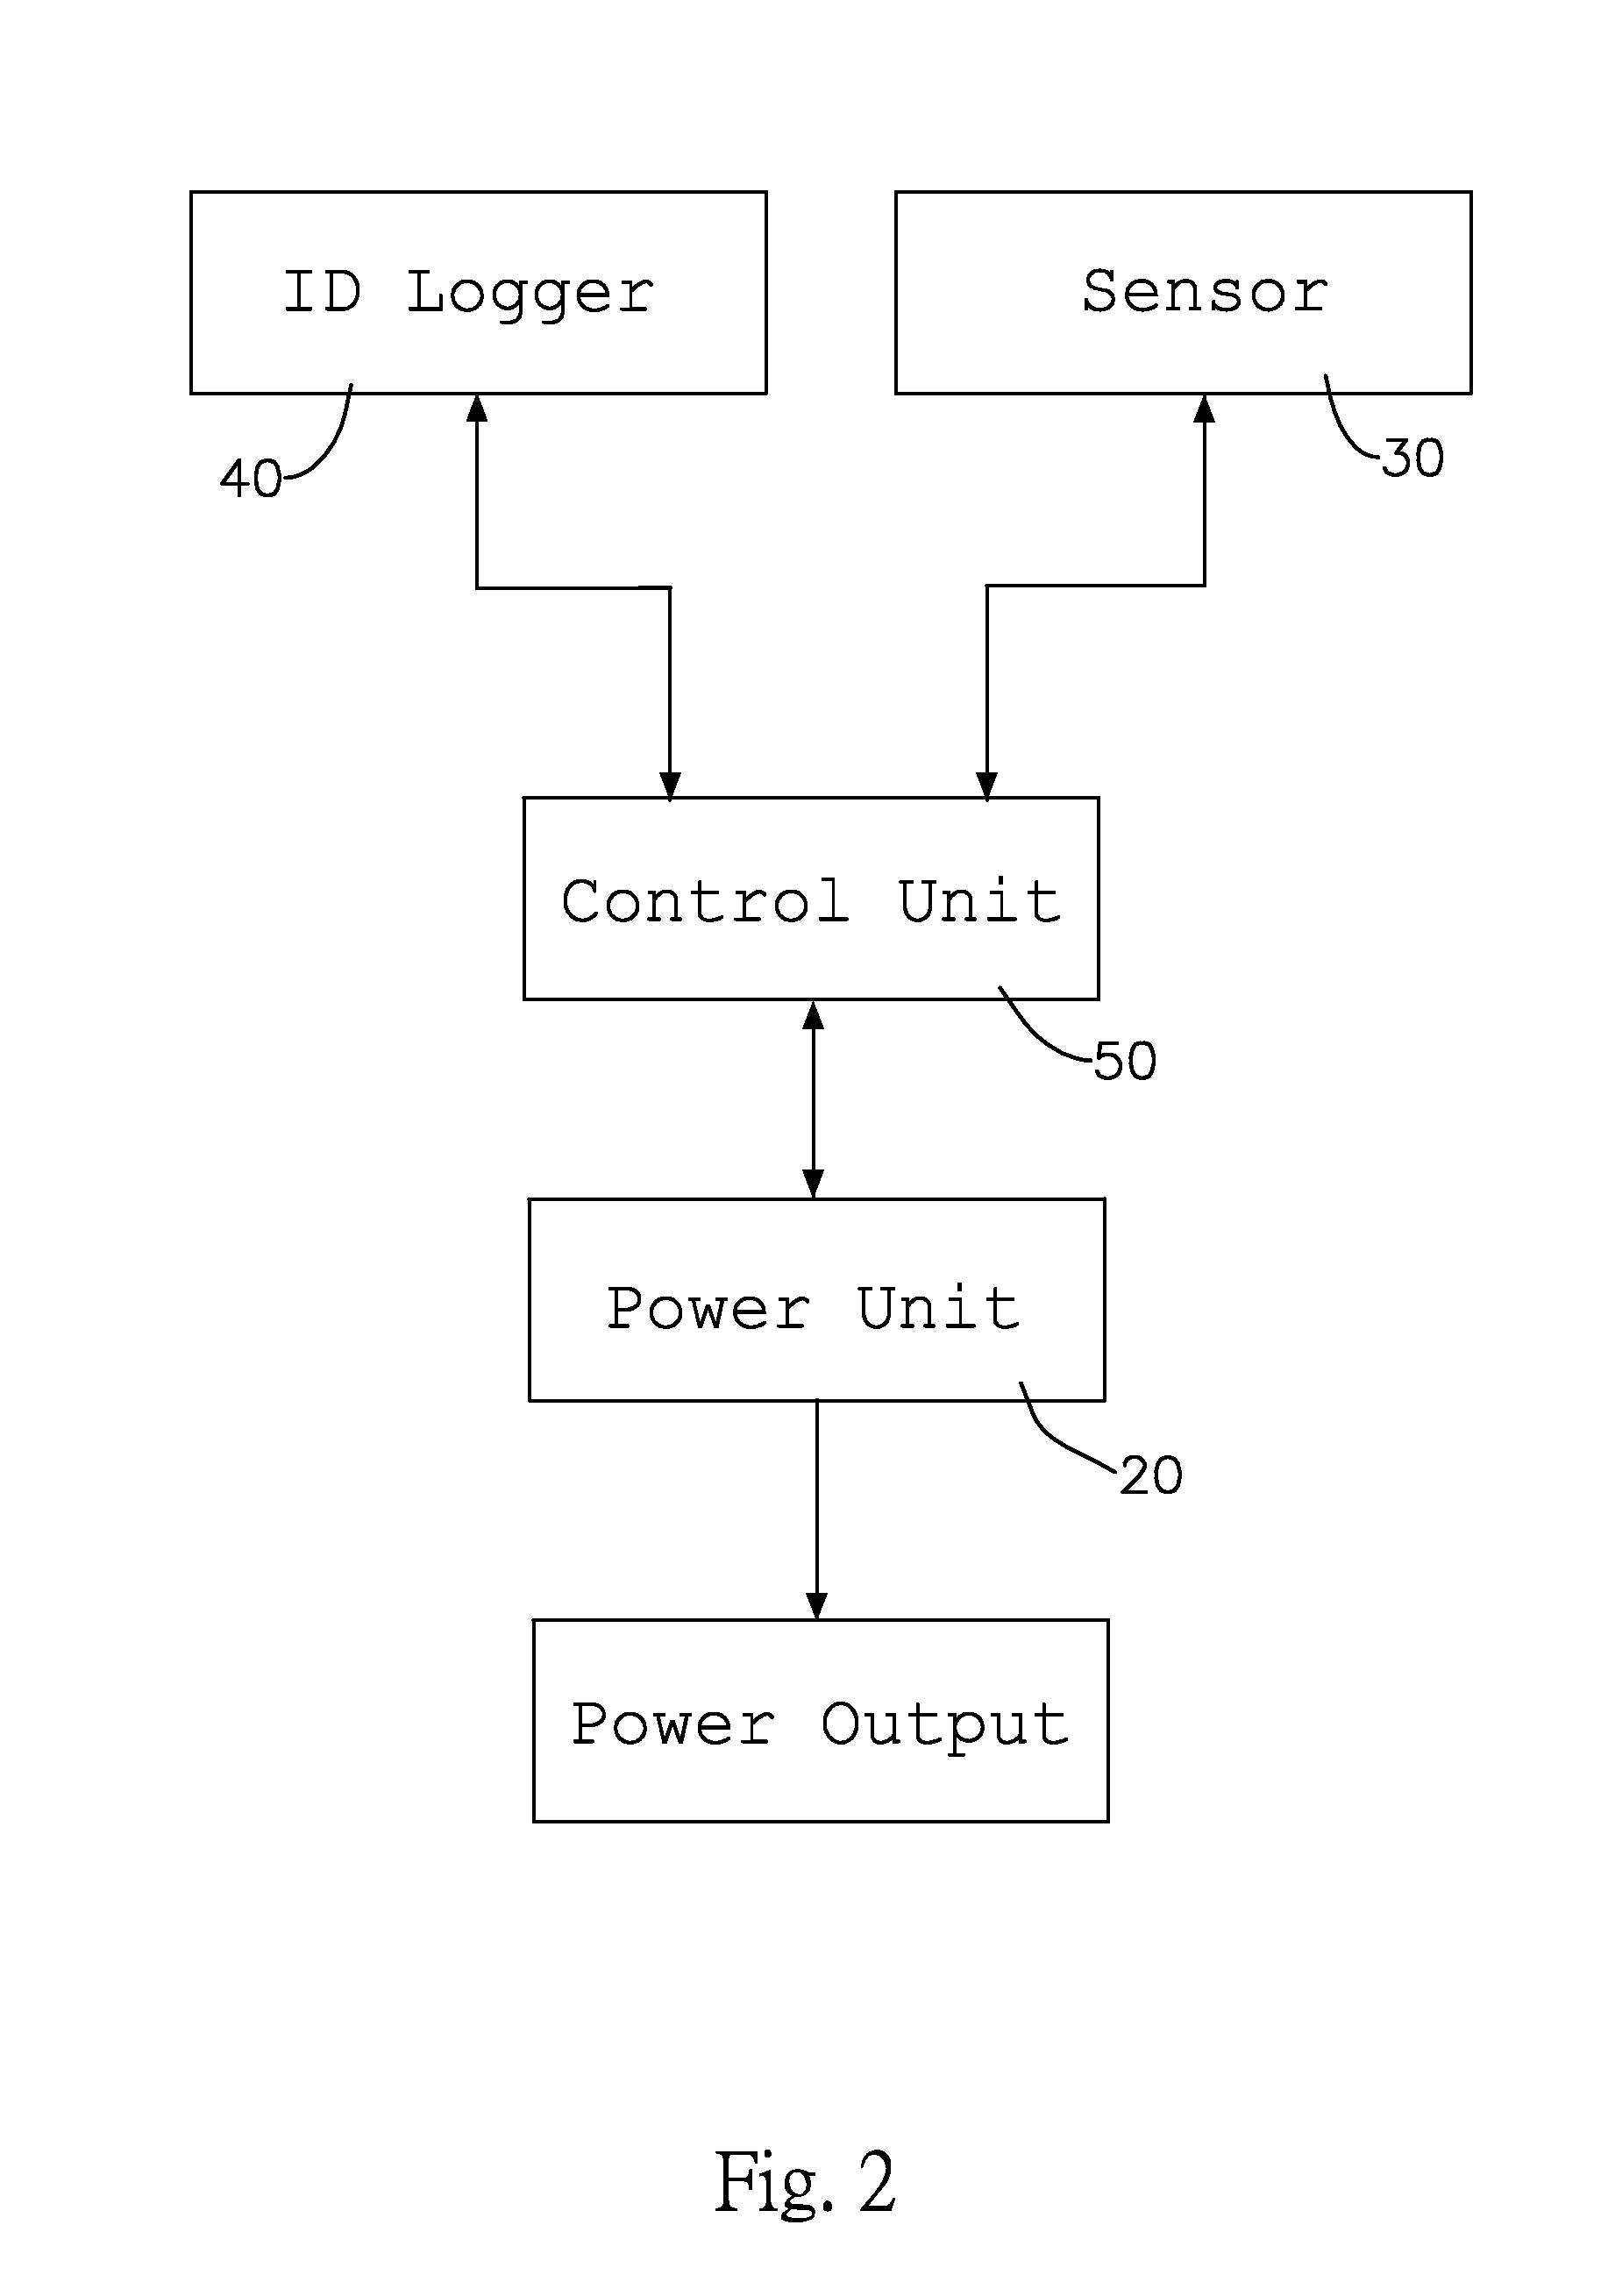 Structure of power driven vehicle